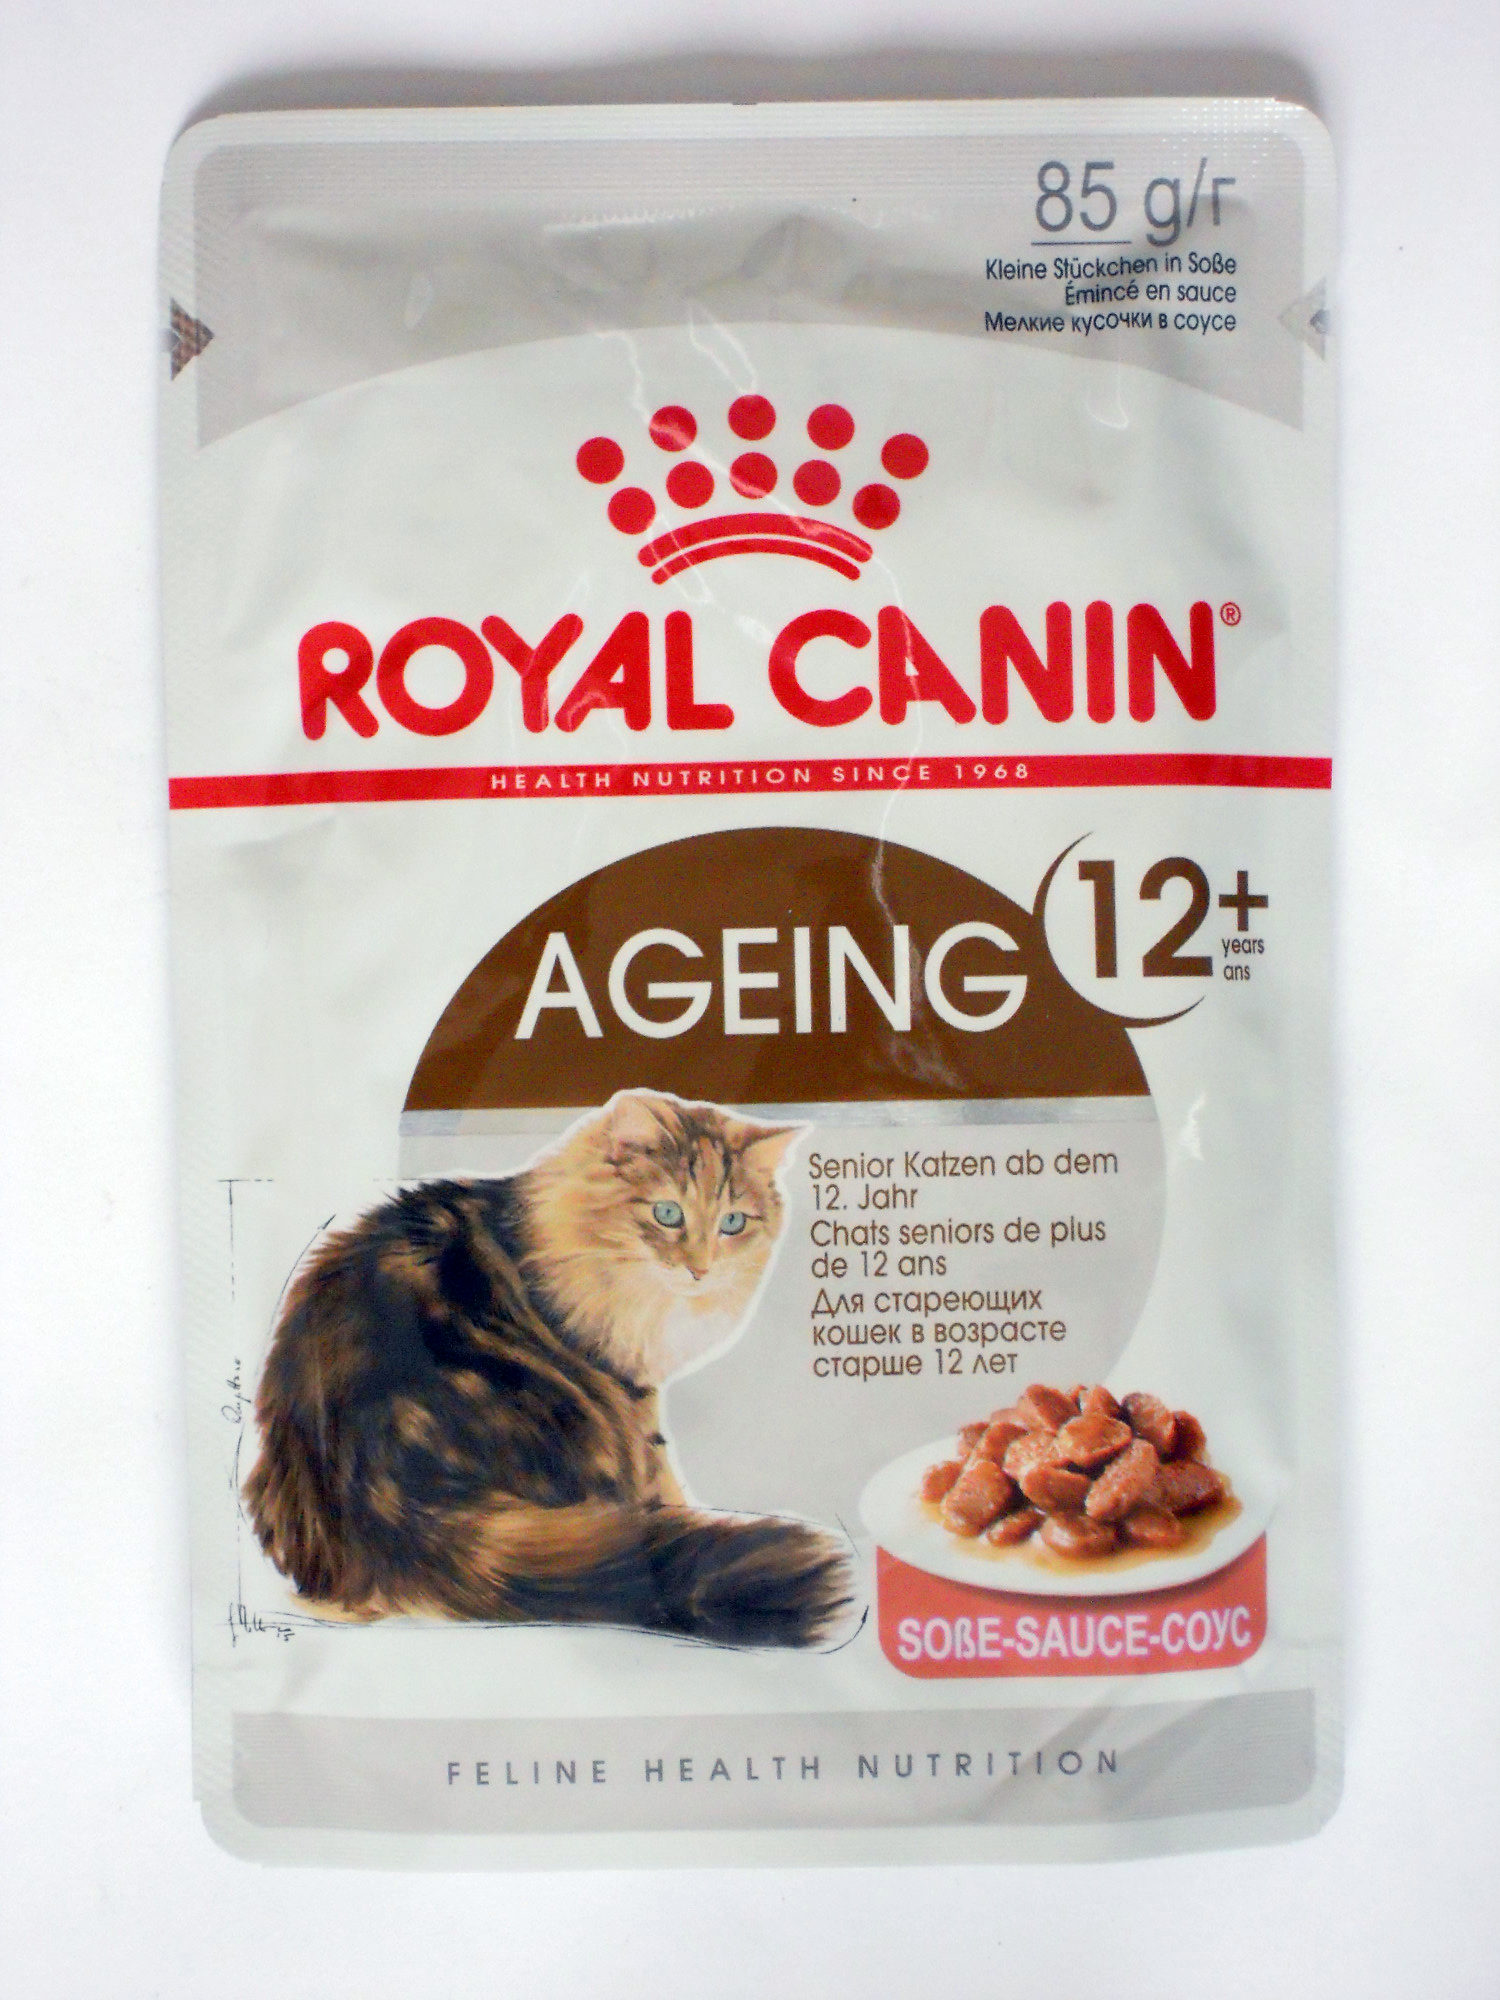 Ageing 12+ - Product - ru